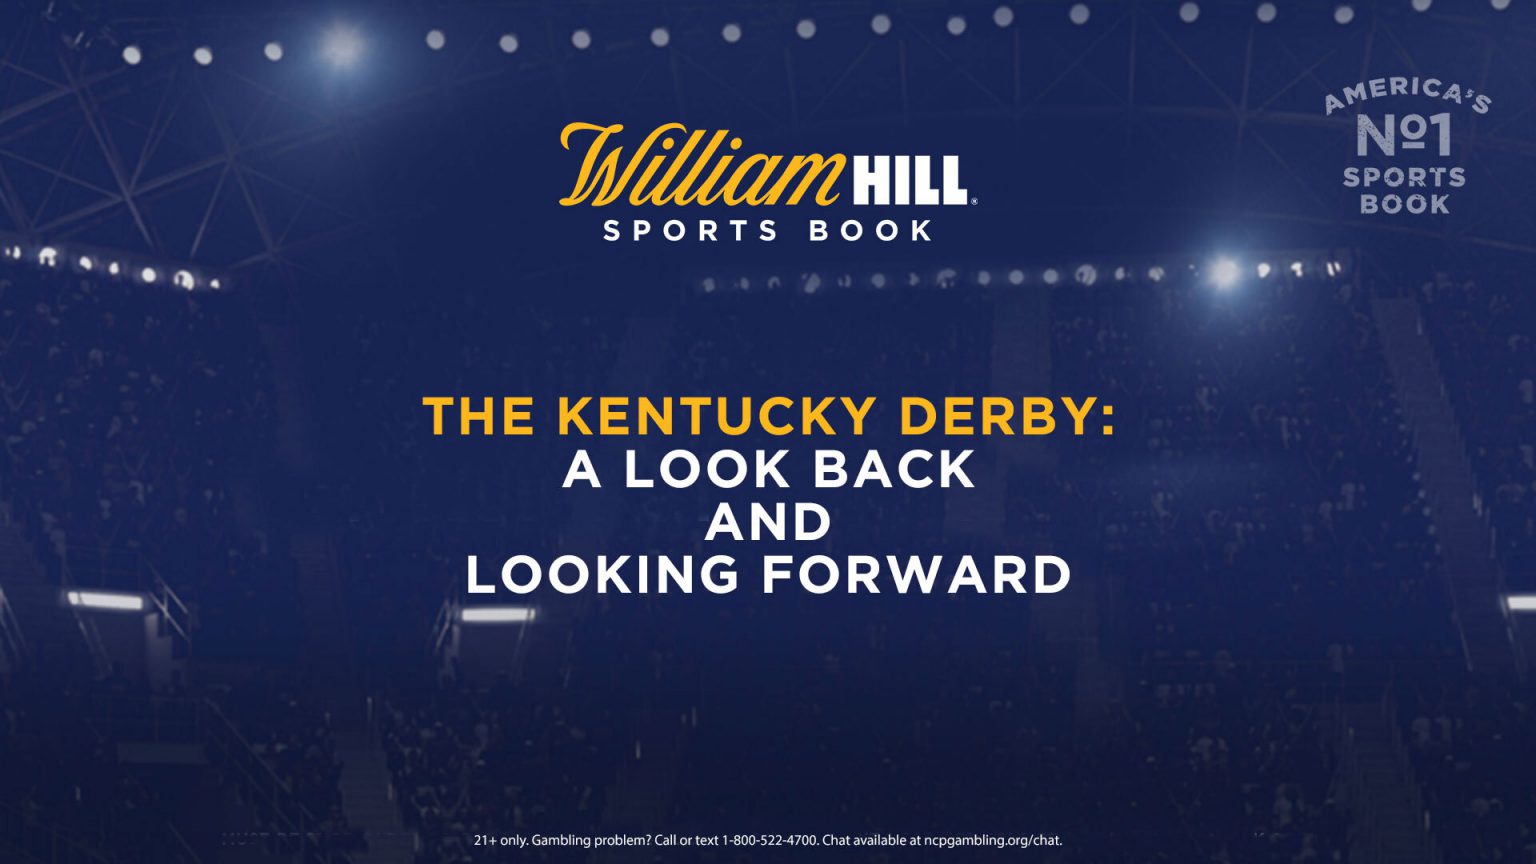 The Kentucky Derby at William Hill A Look Back and Looking Forward